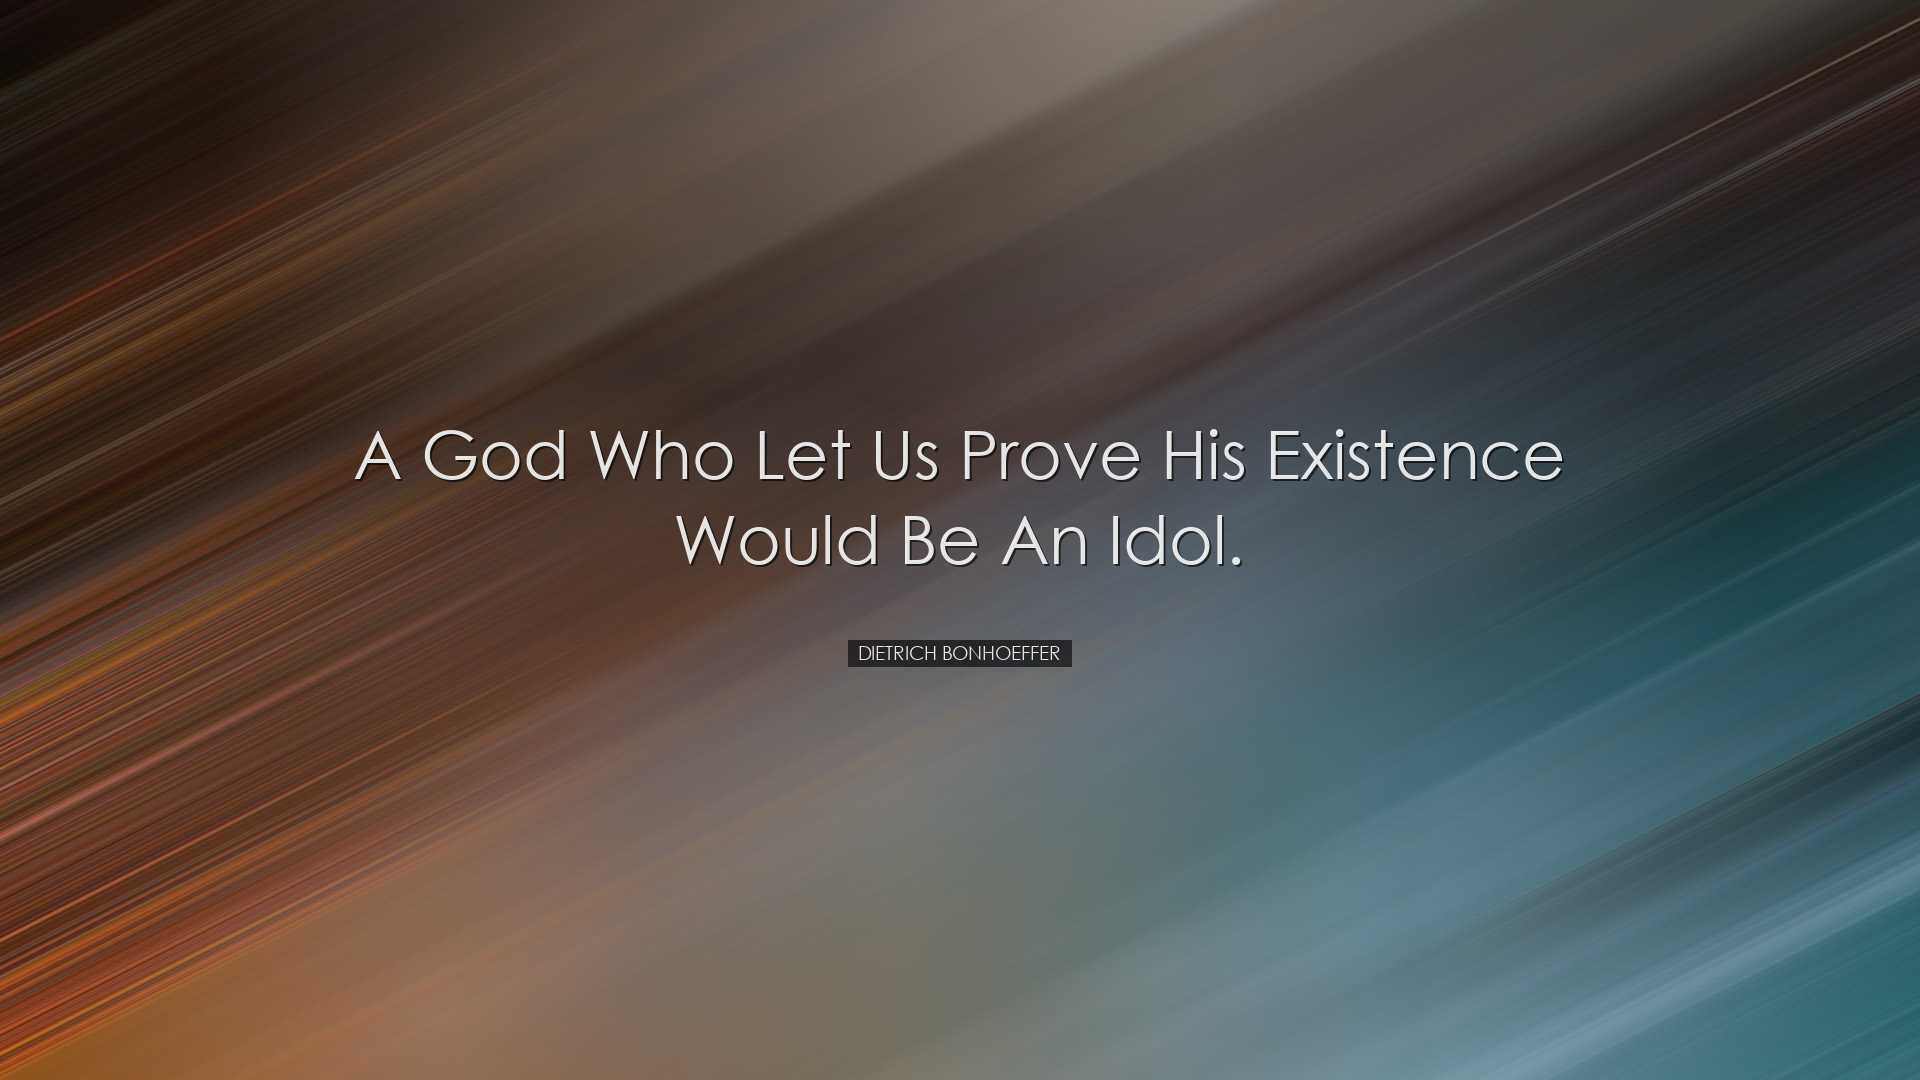 A god who let us prove his existence would be an idol. - Dietrich